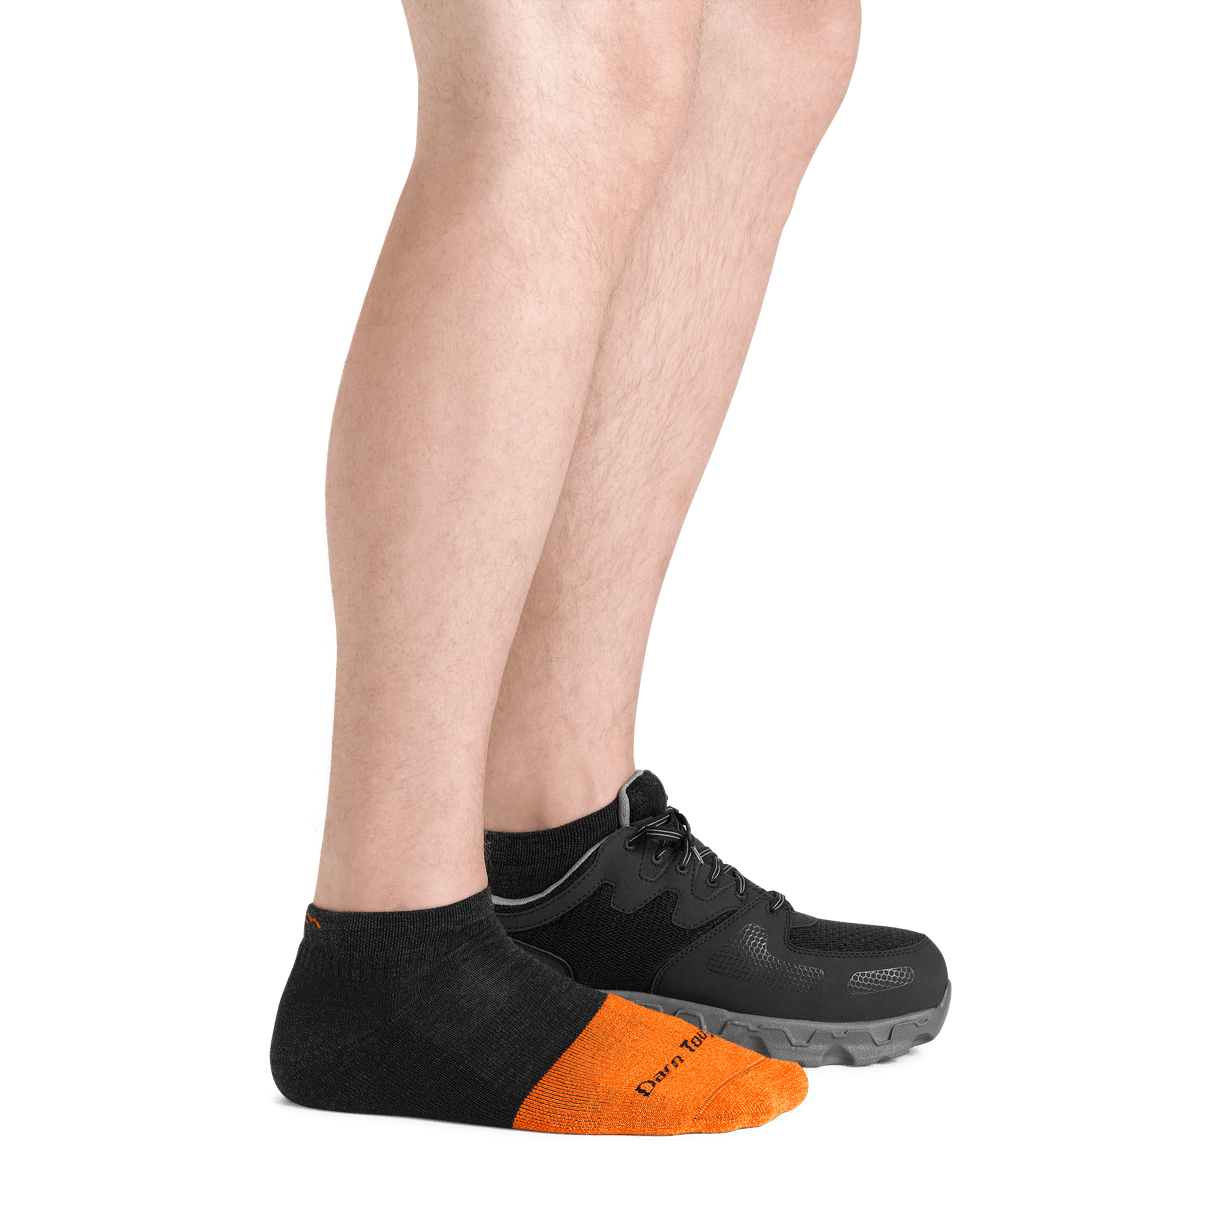 Darn Tough Mens Steely No Show Lightweight with Cushion and Full Cushion Toe Box Socks  - 